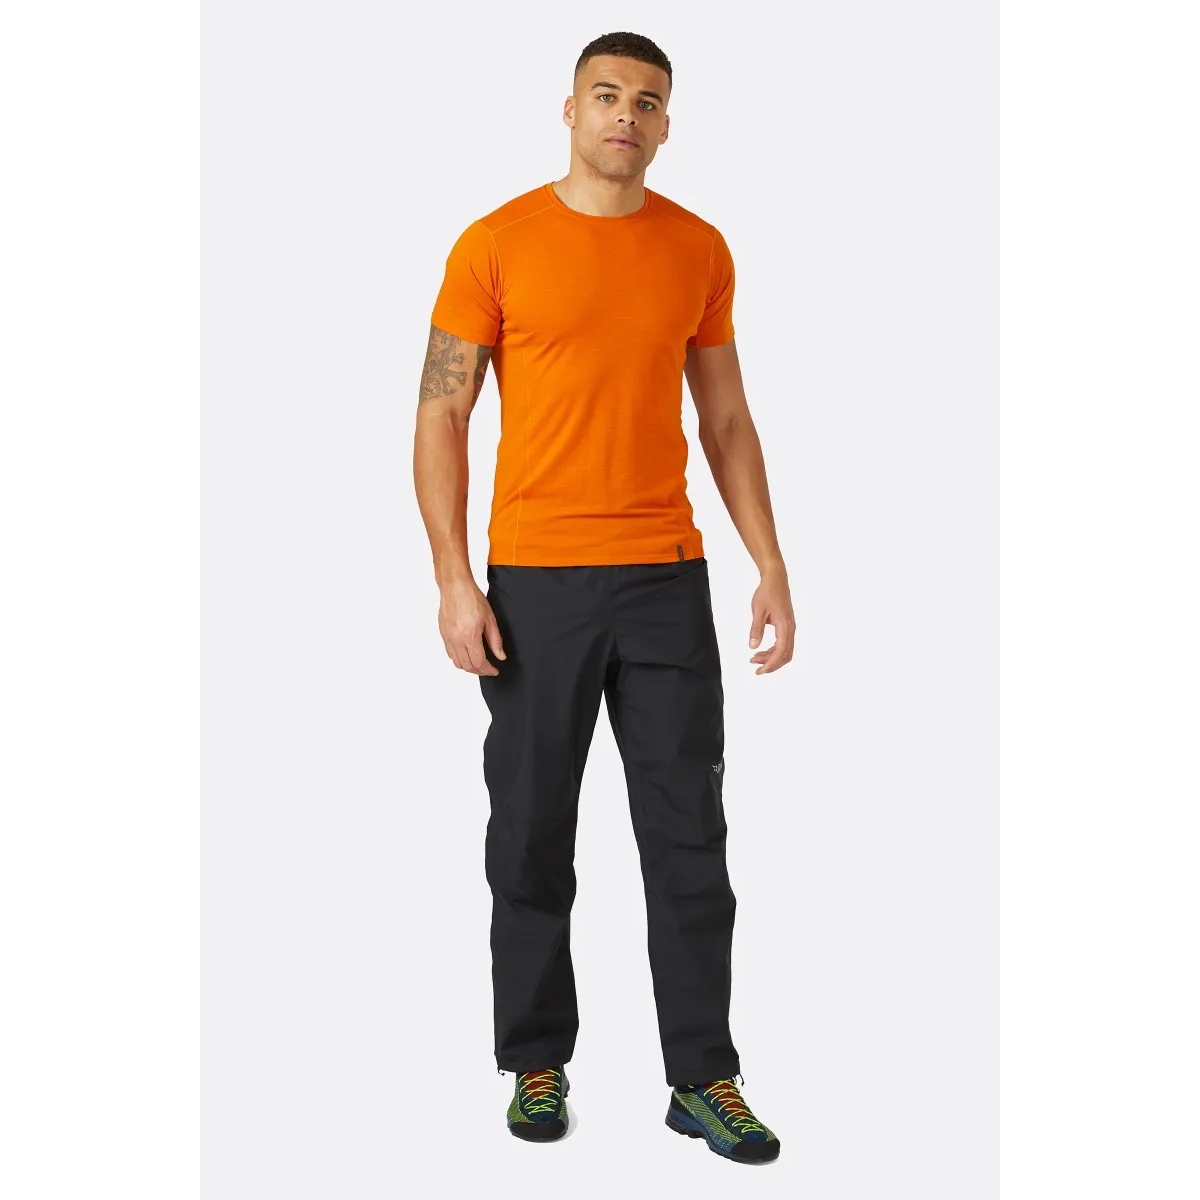 Purchase RAB Flux Pants online at OutdoorXL